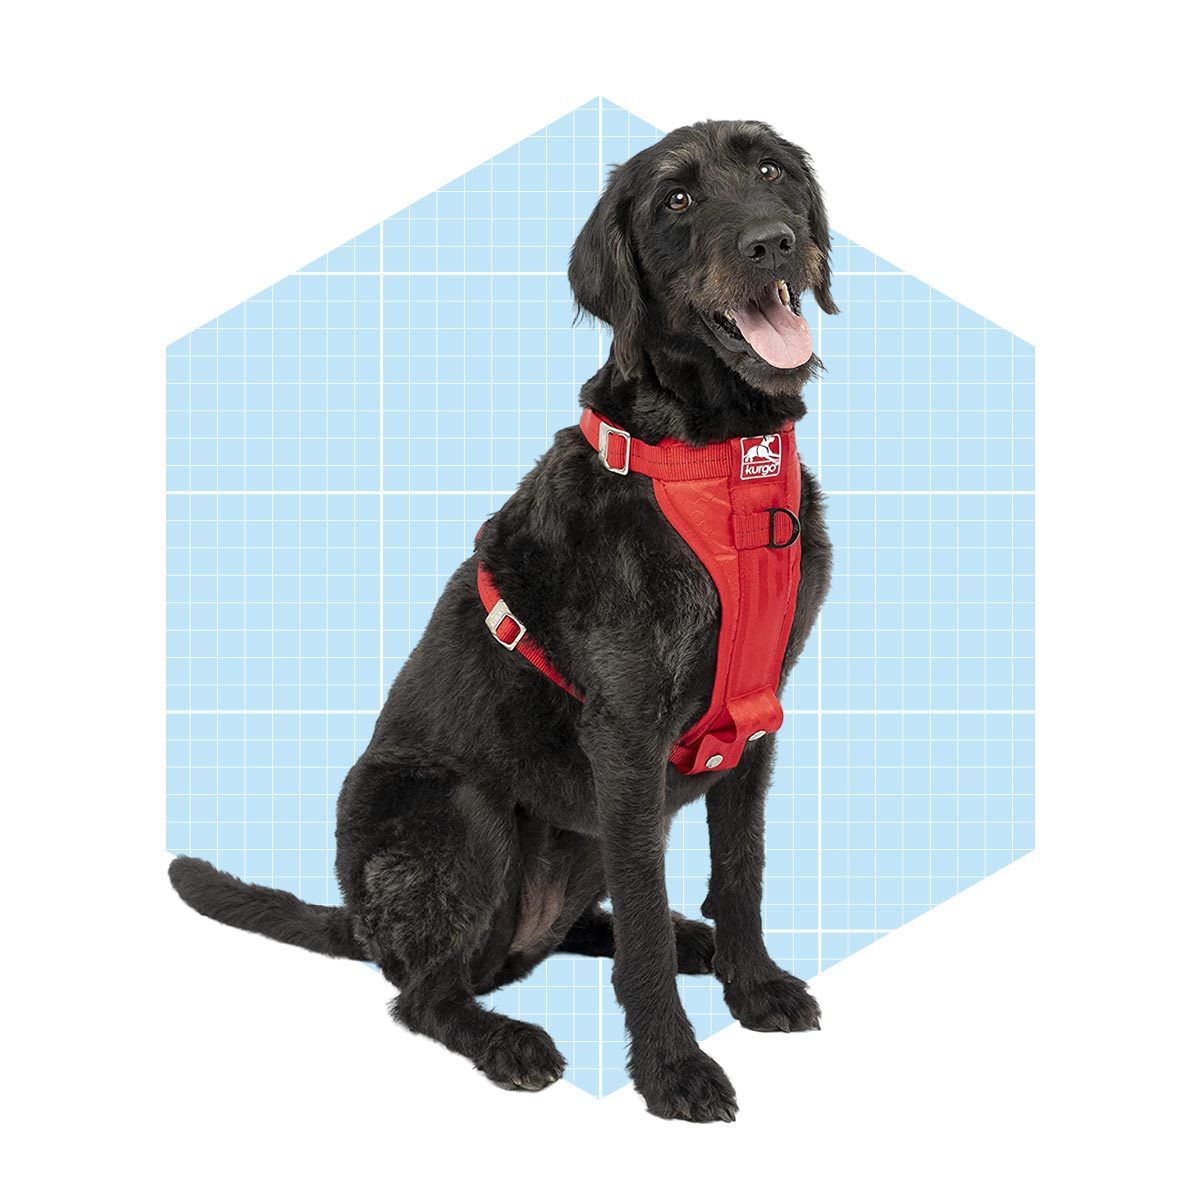 <h3>Kurgo Tru-Fit Harness Seat Belt</h3> <p>Larger breeds may not fit inside a padded, safety-tested car seat for dogs. To keep these canines confined, a <a href="https://www.familyhandyman.com/list/best-dog-harnesses/" rel="noopener noreferrer">harness</a> clipped to an existing seat belt works best. The <a href="https://www.amazon.com/Kurgo-Certified-Seatbelt-Enhanced-Strength/dp/B00LNJ92E2" rel="nofollow noopener noreferrer">Kurgo Tru-Fit</a> offers one of the best economical options for big dogs weighing 75 to 100 pounds. It also comes in five sizes to accommodate smaller pups as well.</p> <p>After voluntary testing with the Center for Pet Safety, Kurgo redesigned and improved an earlier version to result in the perfected Kurgo Tru-Fit. It now features a wide, padded chest plate to restrain dogs in case of impact, five points of adjustment for fitting, a leash attachment on the front and shoulders and a seat belt loop with carabiner to connect to any existing seat belt.</p> <p><strong>Pros</strong></p> <ul> <li>Comes in five sizes to accommodate small to large dogs (up to 100 pounds)</li> <li>Crash-tested</li> <li>Five points of adjustment for a better fit</li> <li>Two leash attachment options for added control when walking</li> <li>Universal seat belt attachment</li> <li>Economically-priced</li> </ul> <p><strong>Cons</strong></p> <ul> <li>The heavier material may not be comfortable for small dogs</li> </ul> <p class="listicle-page__cta-button-shop"><a class="shop-btn" href="https://www.amazon.com/Kurgo-Certified-Seatbelt-Enhanced-Strength/dp/B00LNJ92E2">Shop Now</a></p>